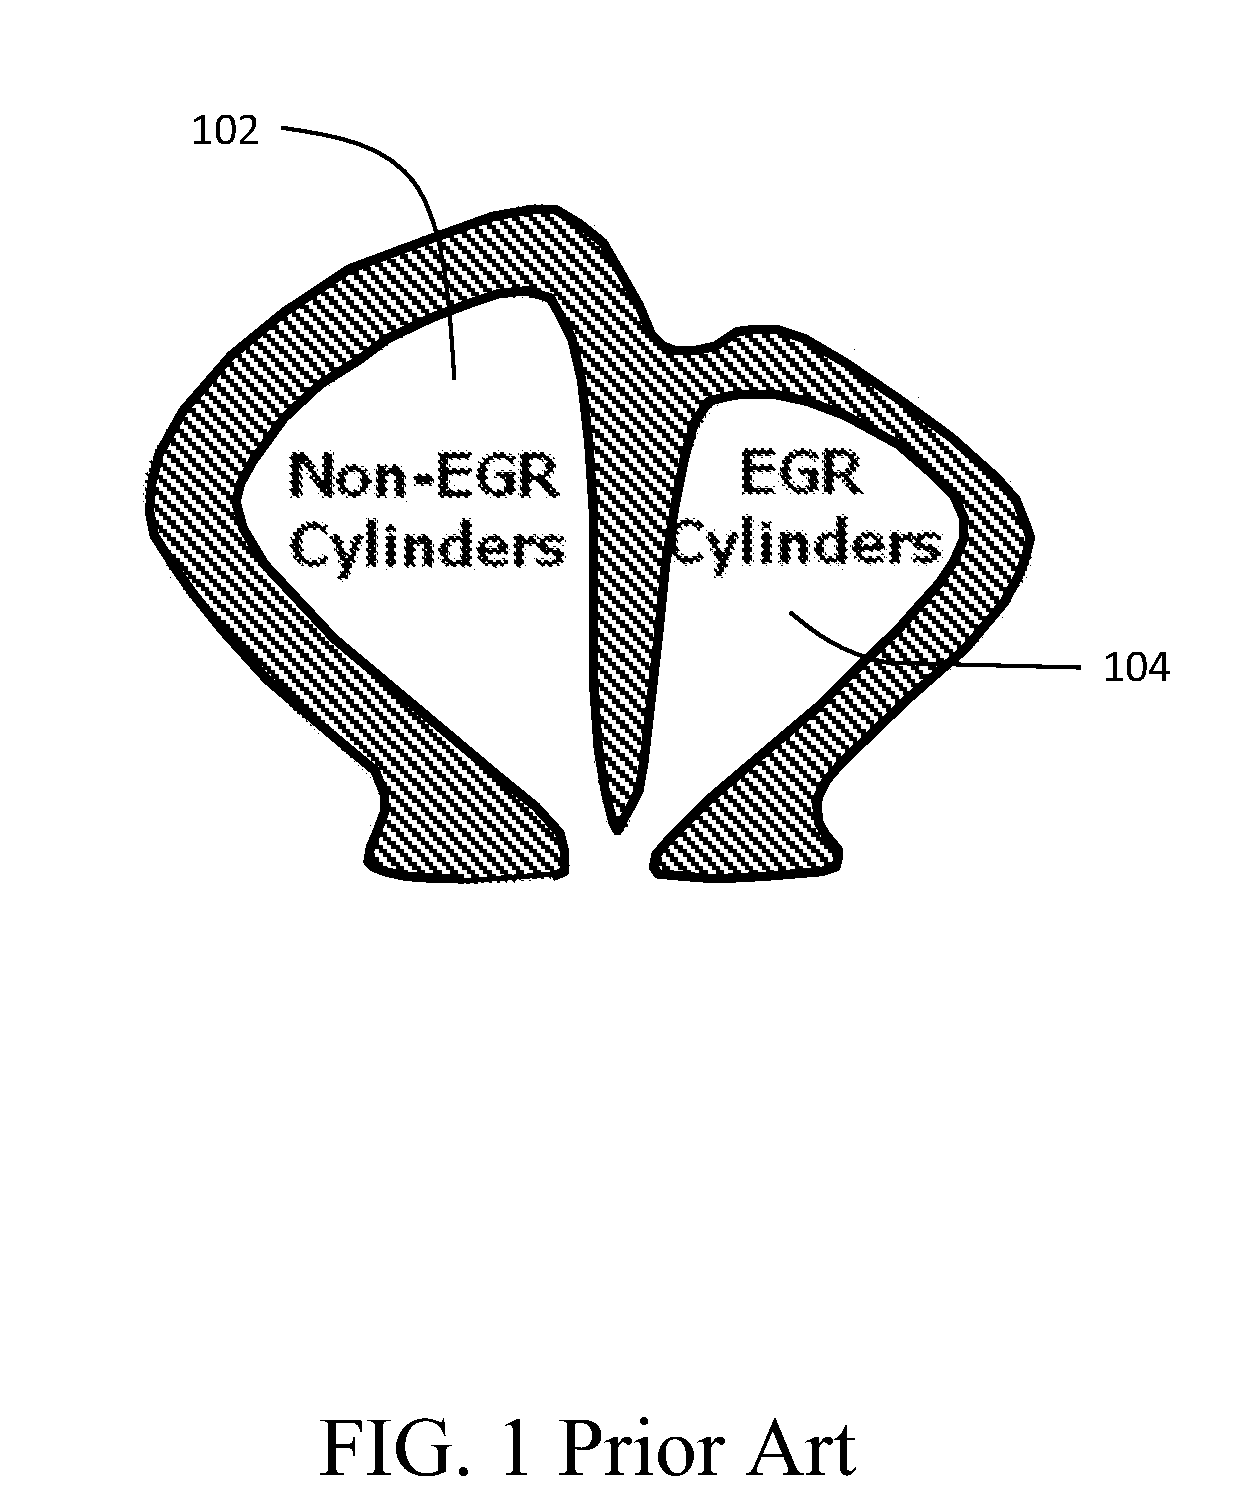 Quad layer passage variable geometry turbine for turbochargers in exhaust gas recirculation engines